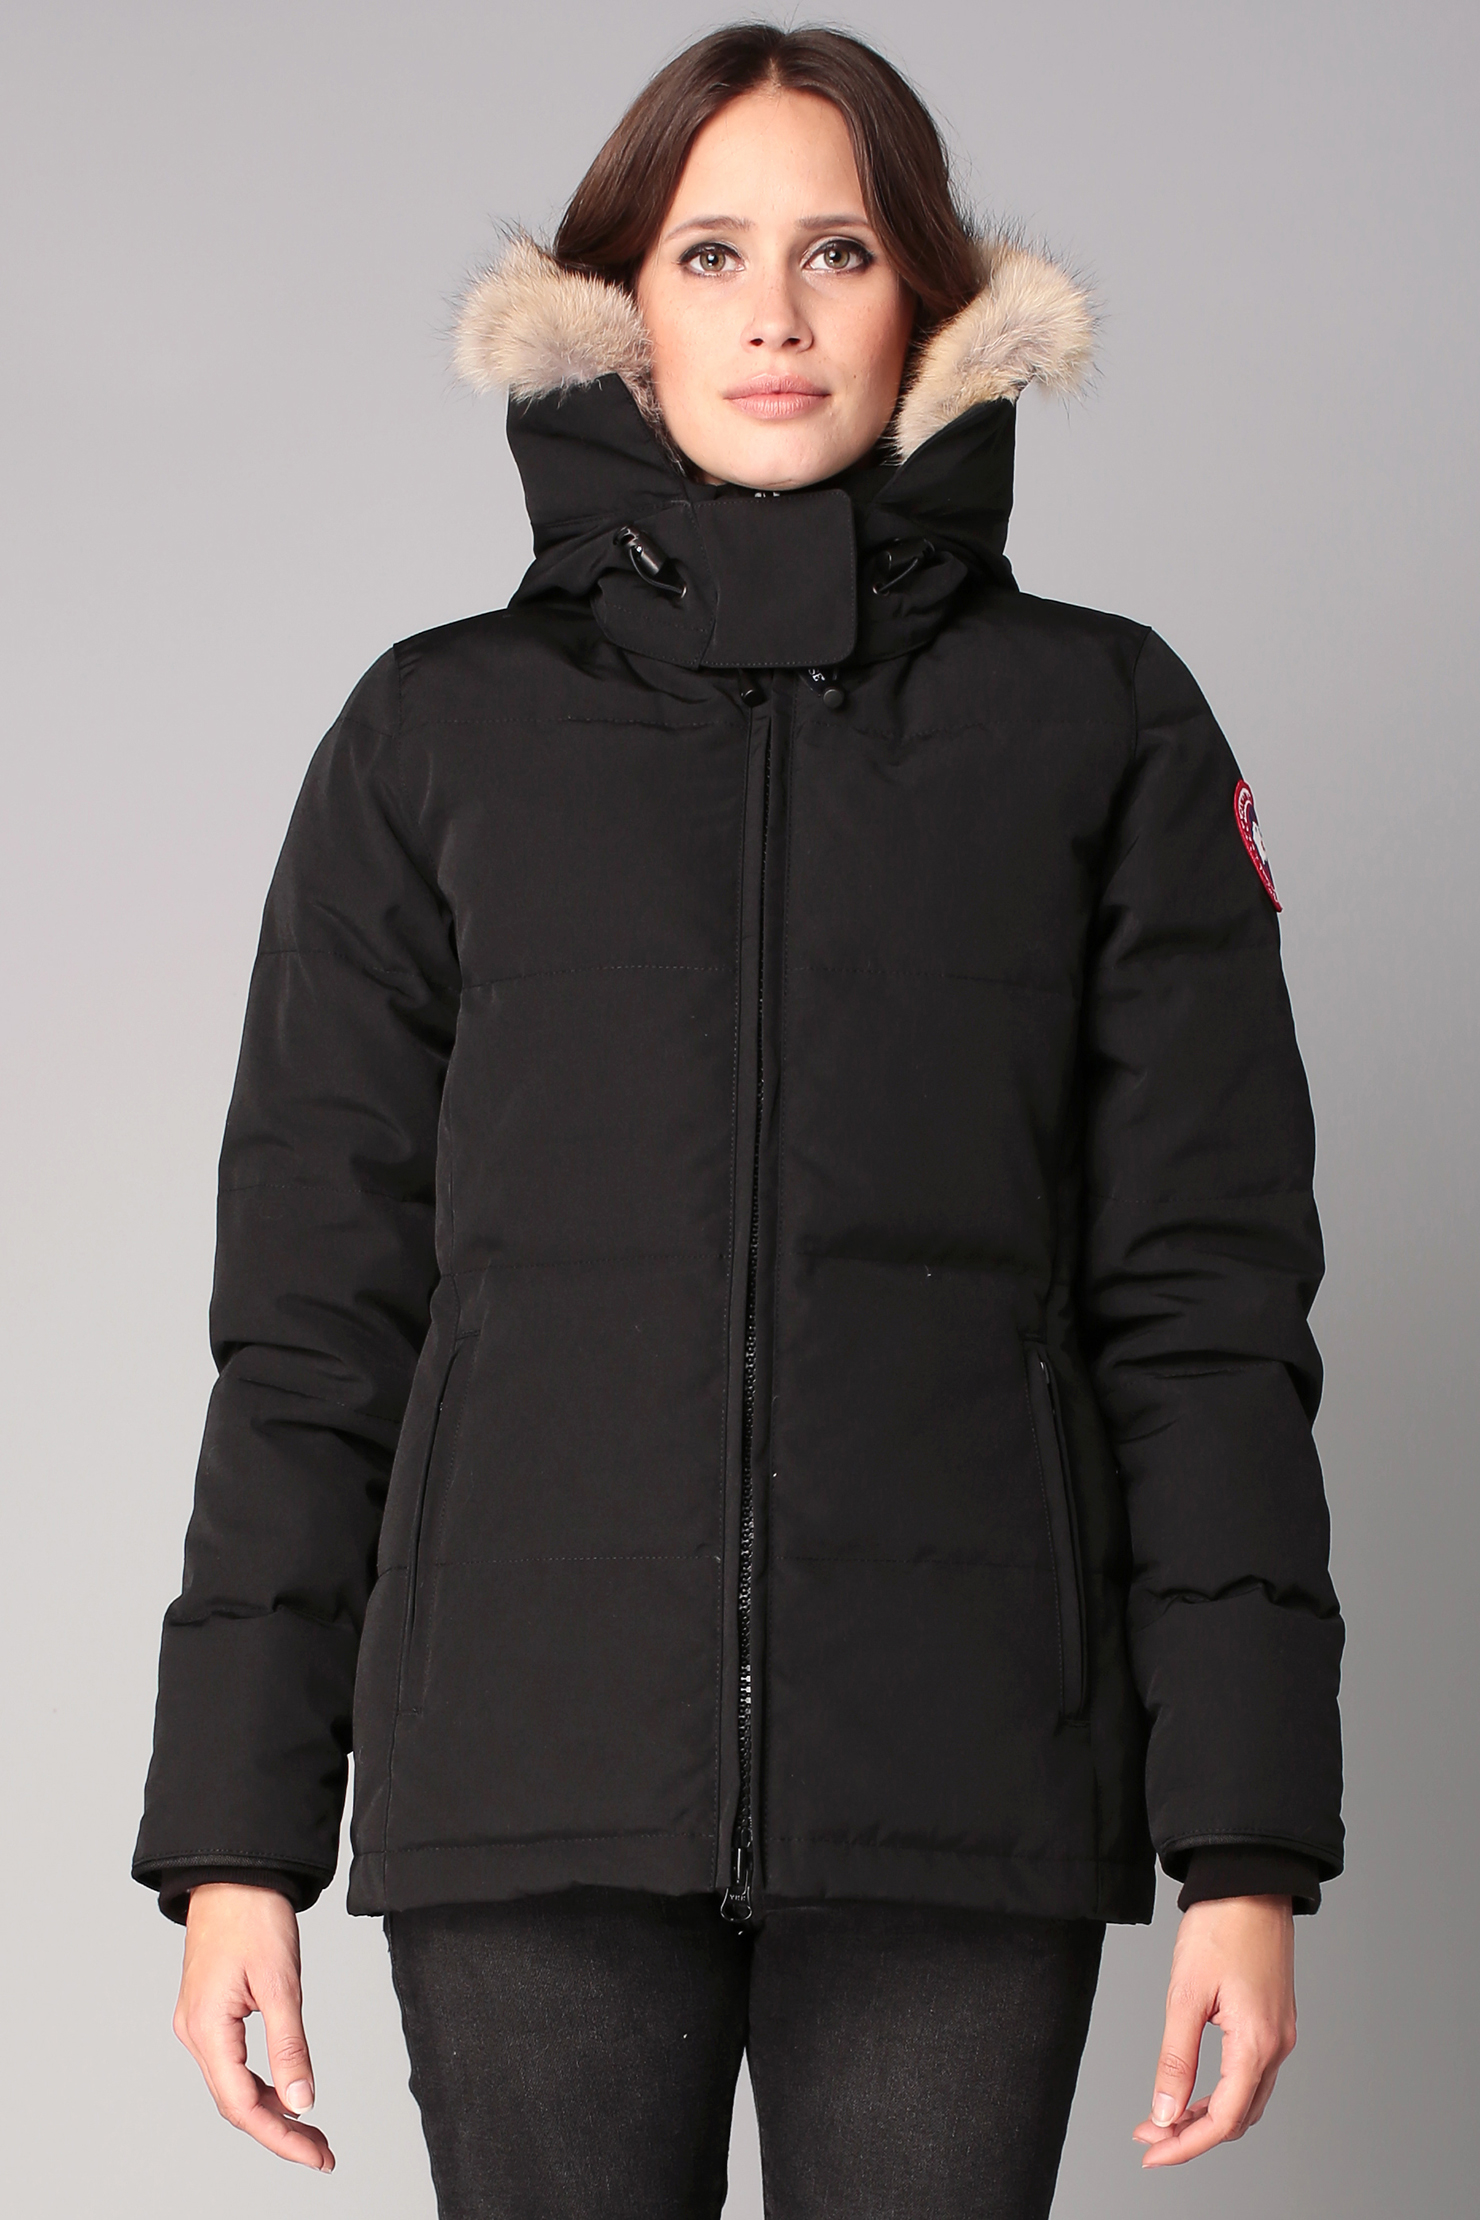 canada goose brookvale quilted jacket, Canada Goose chateau parka ...